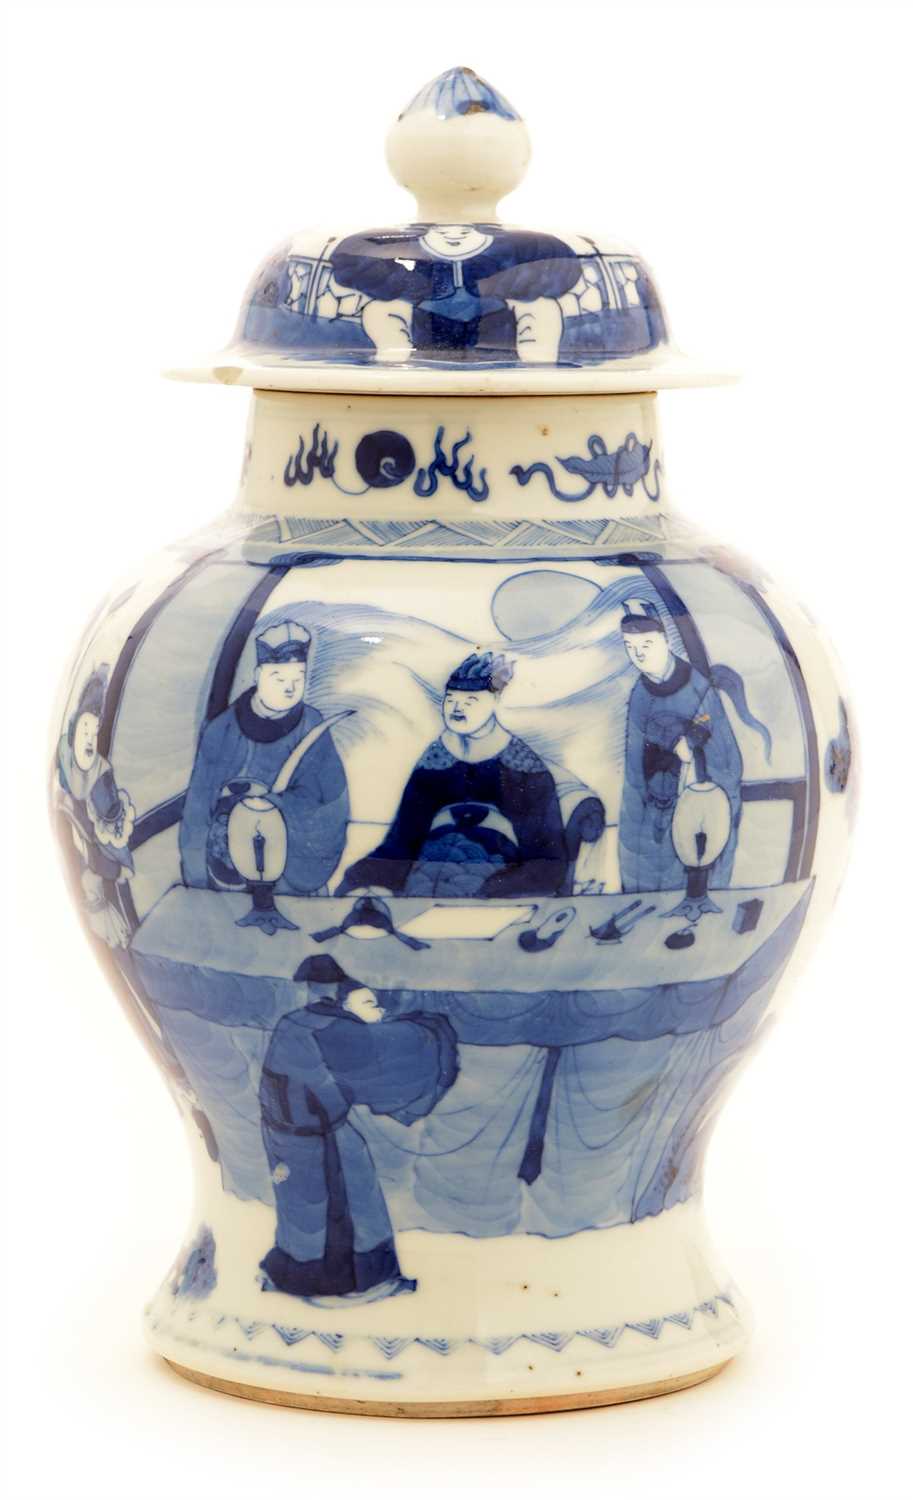 Lot 9 - A Chinese blue and white baluster jar and cover.